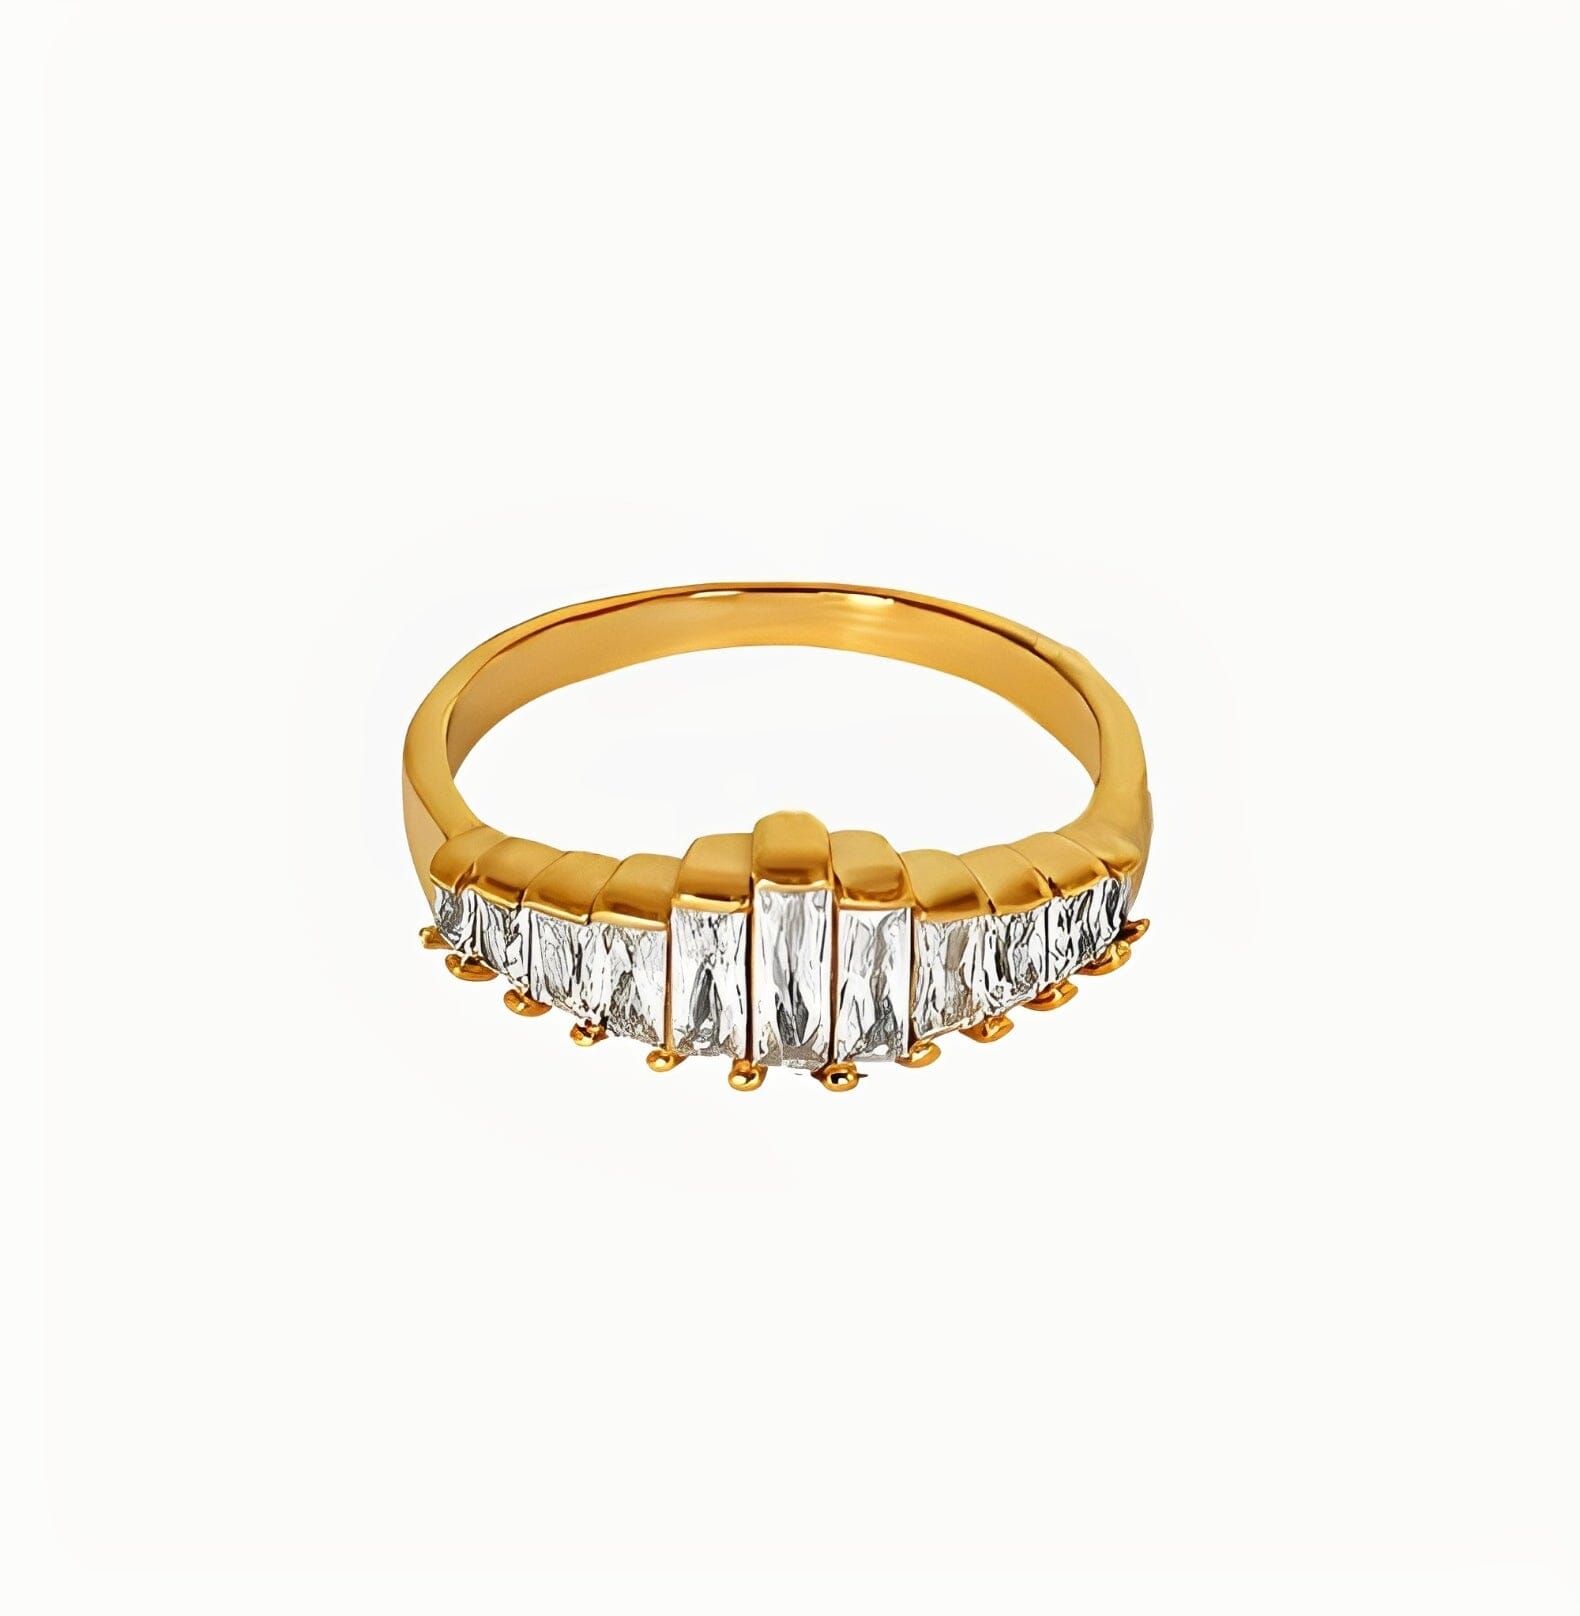 CELIO ZIRCON RING braclet Yubama Jewelry Online Store - The Elegant Designs of Gold and Silver ! 